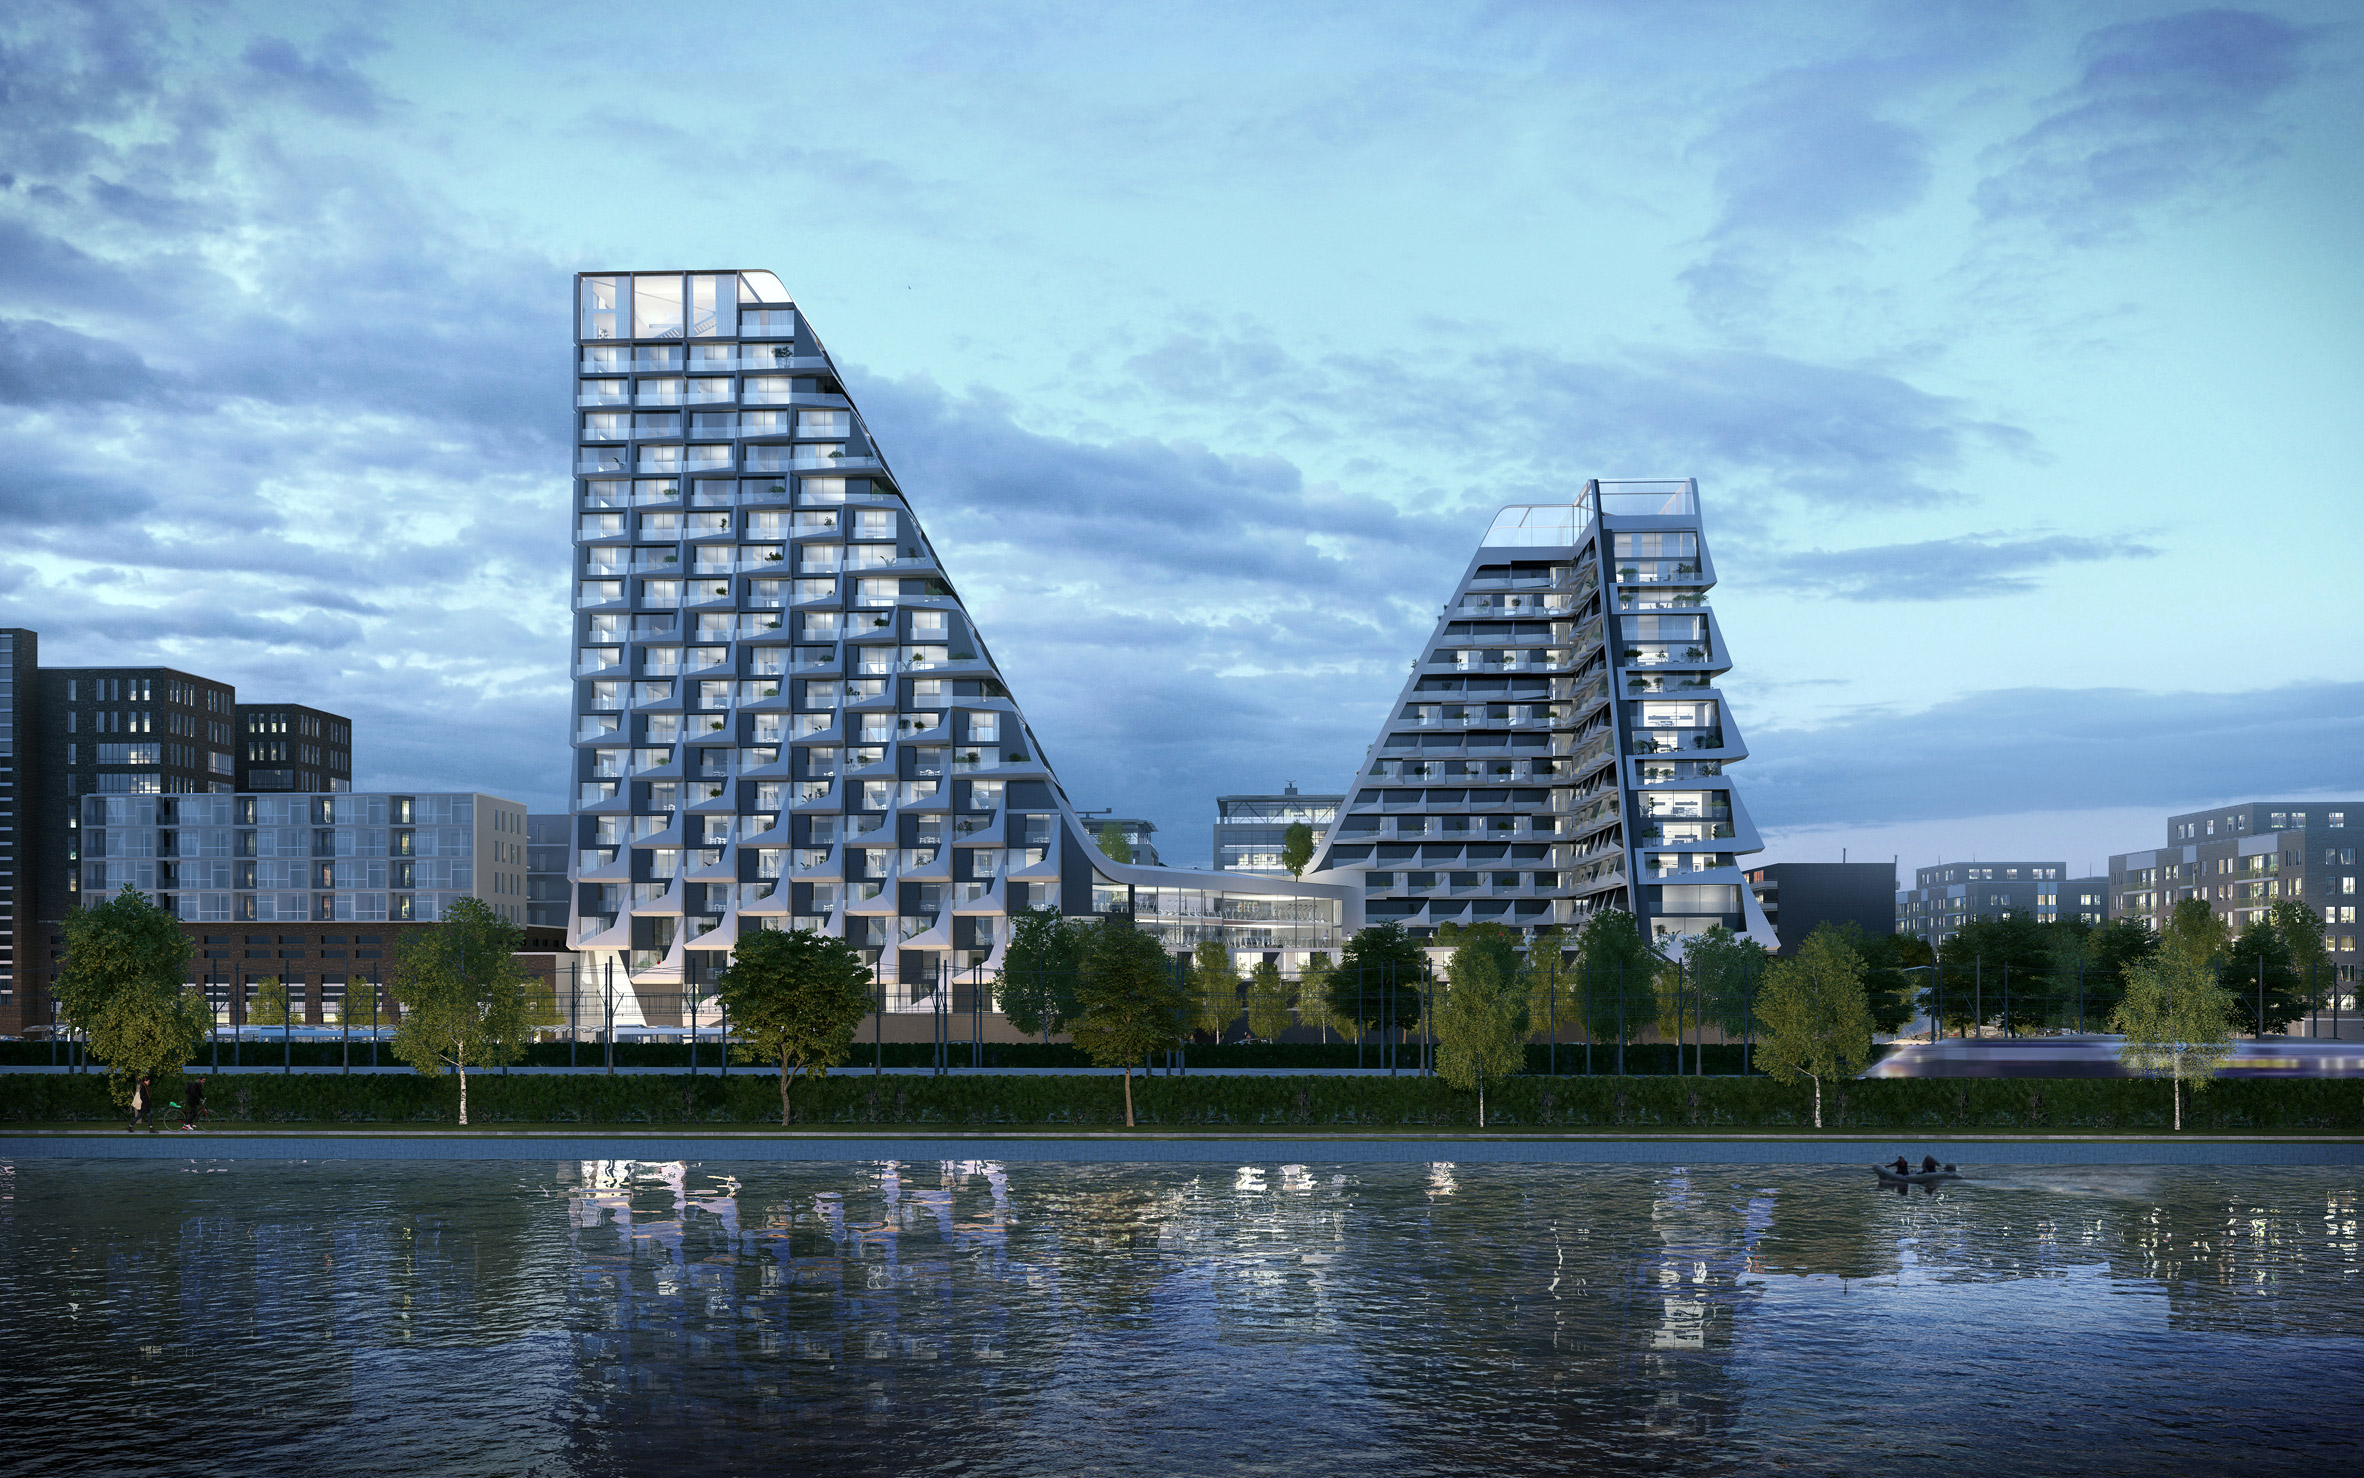 Peter Pichler unveils figure-of-eight-shaped housing with rooftop 